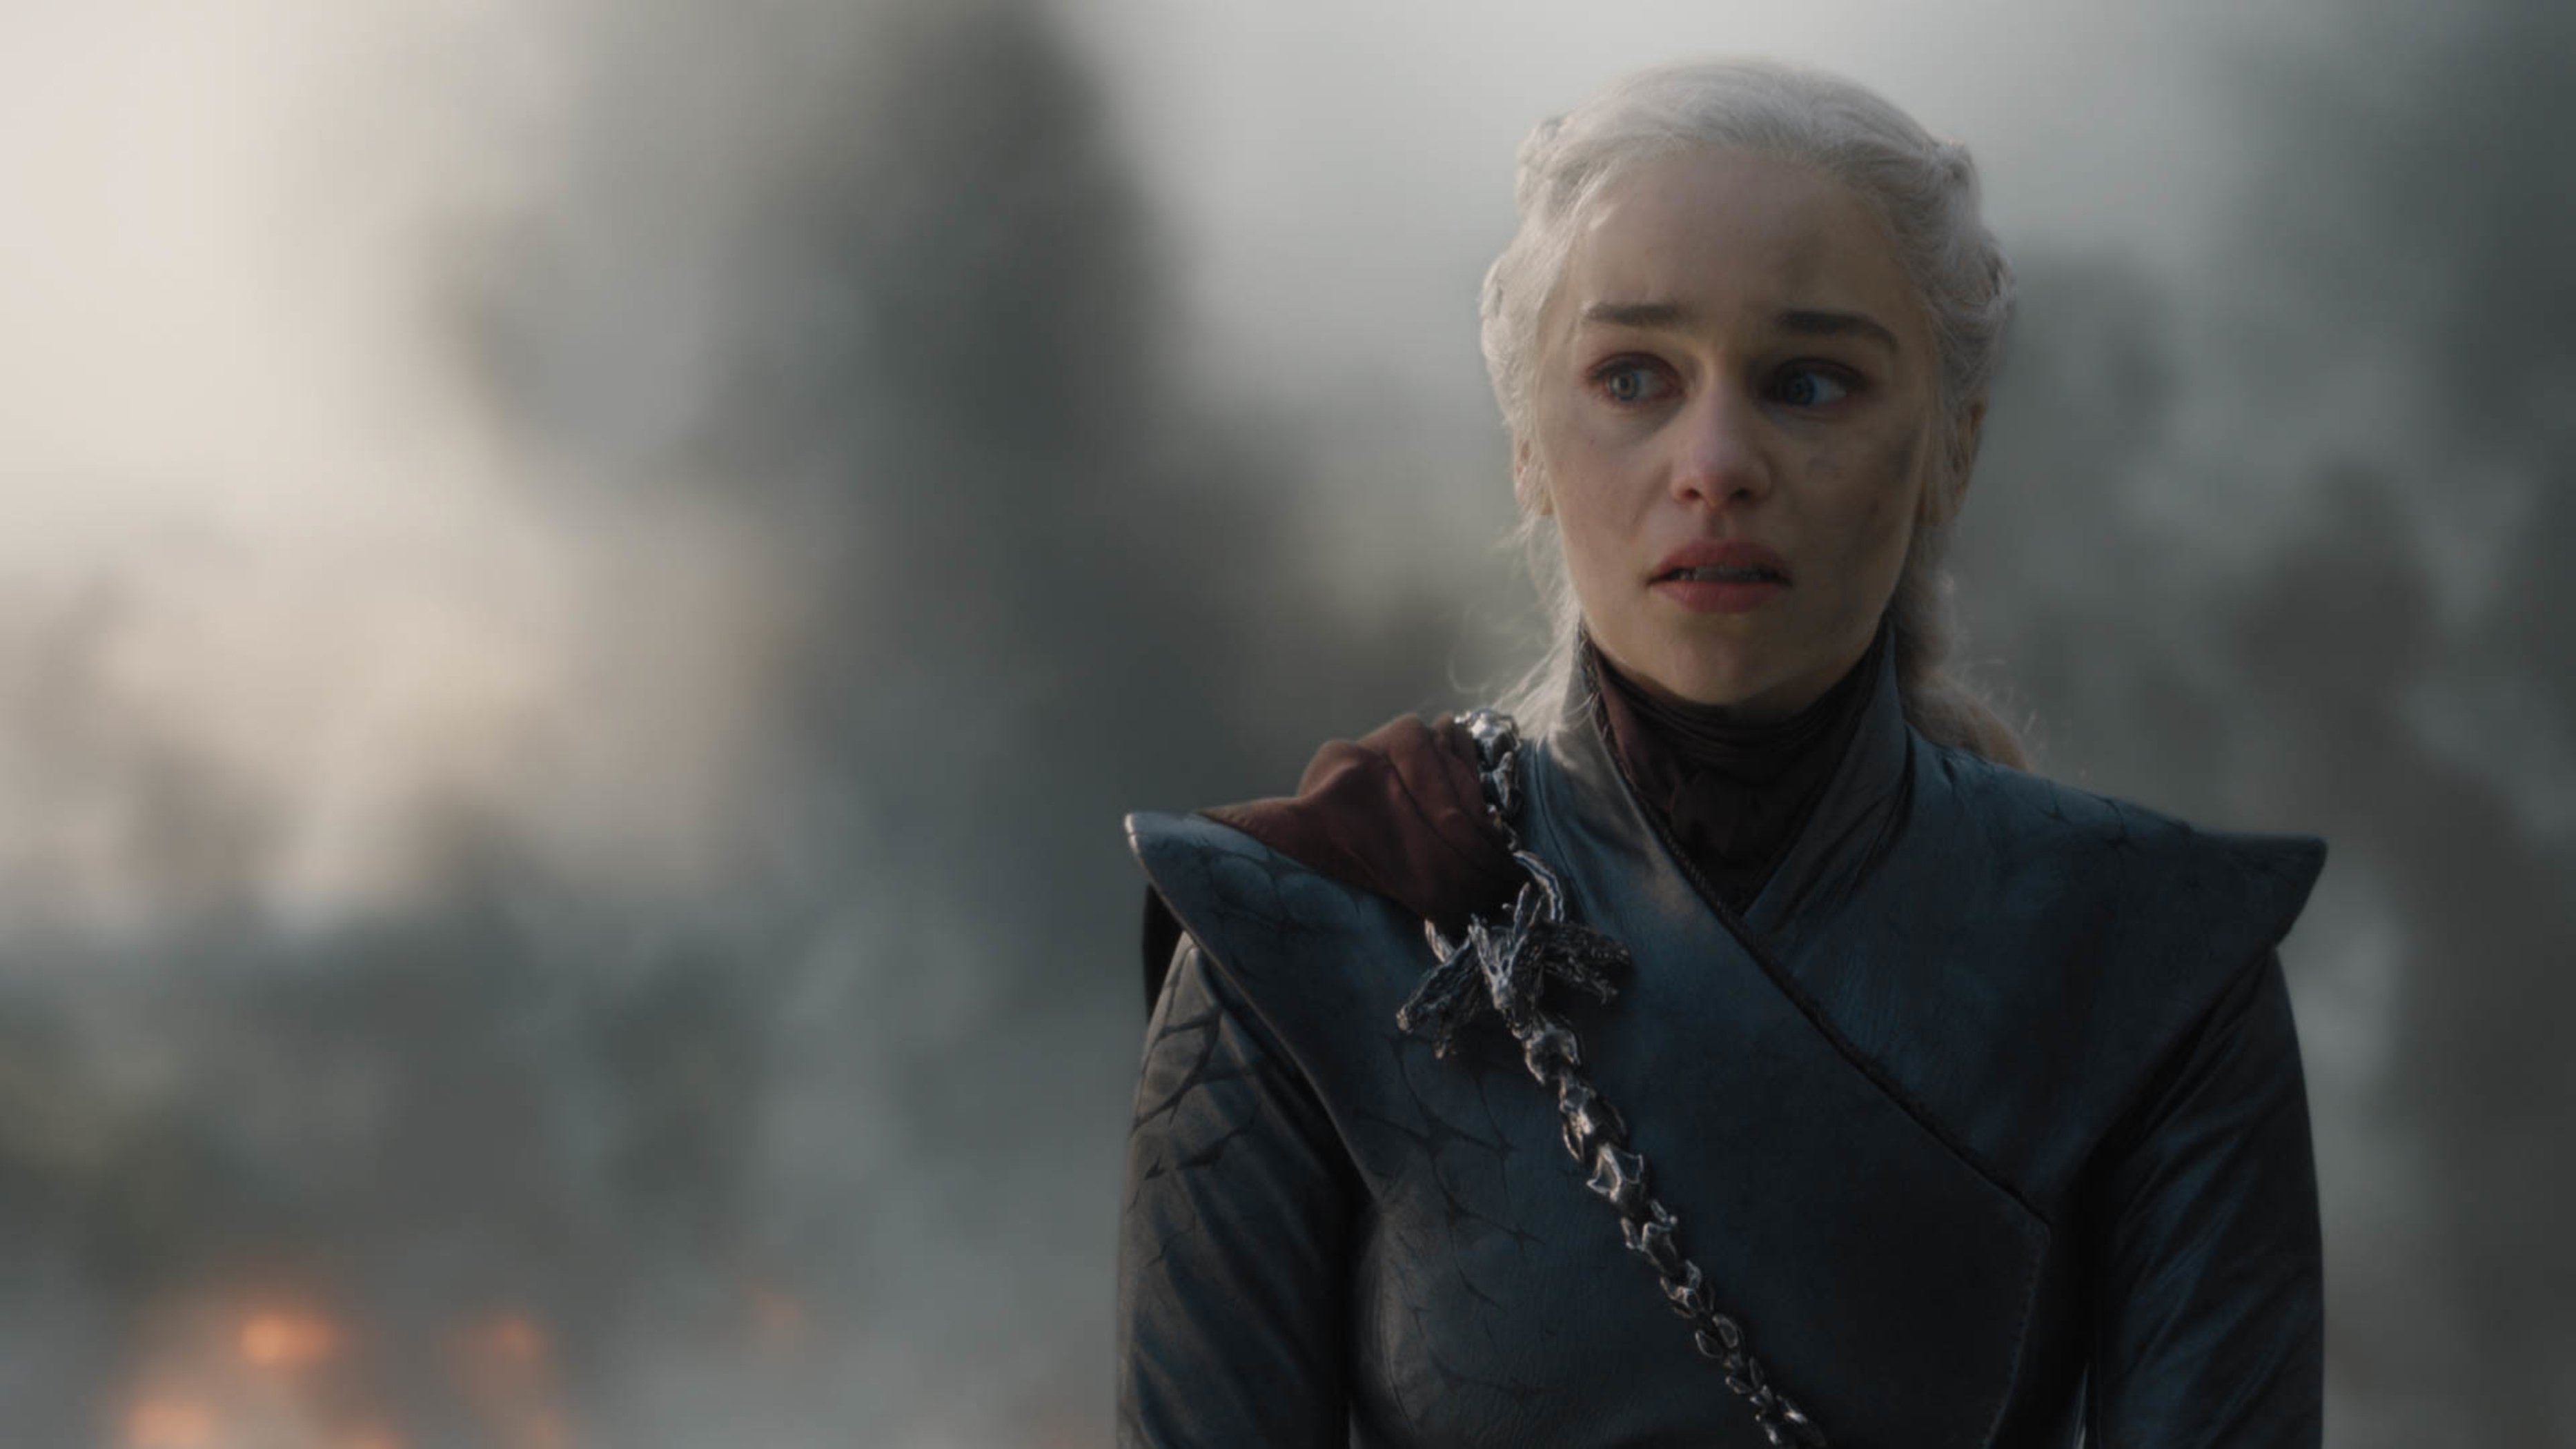 Daenerys right before she decides to burn all of King's Landing (Season 8, Episode 5 of 'Game of Thrones').